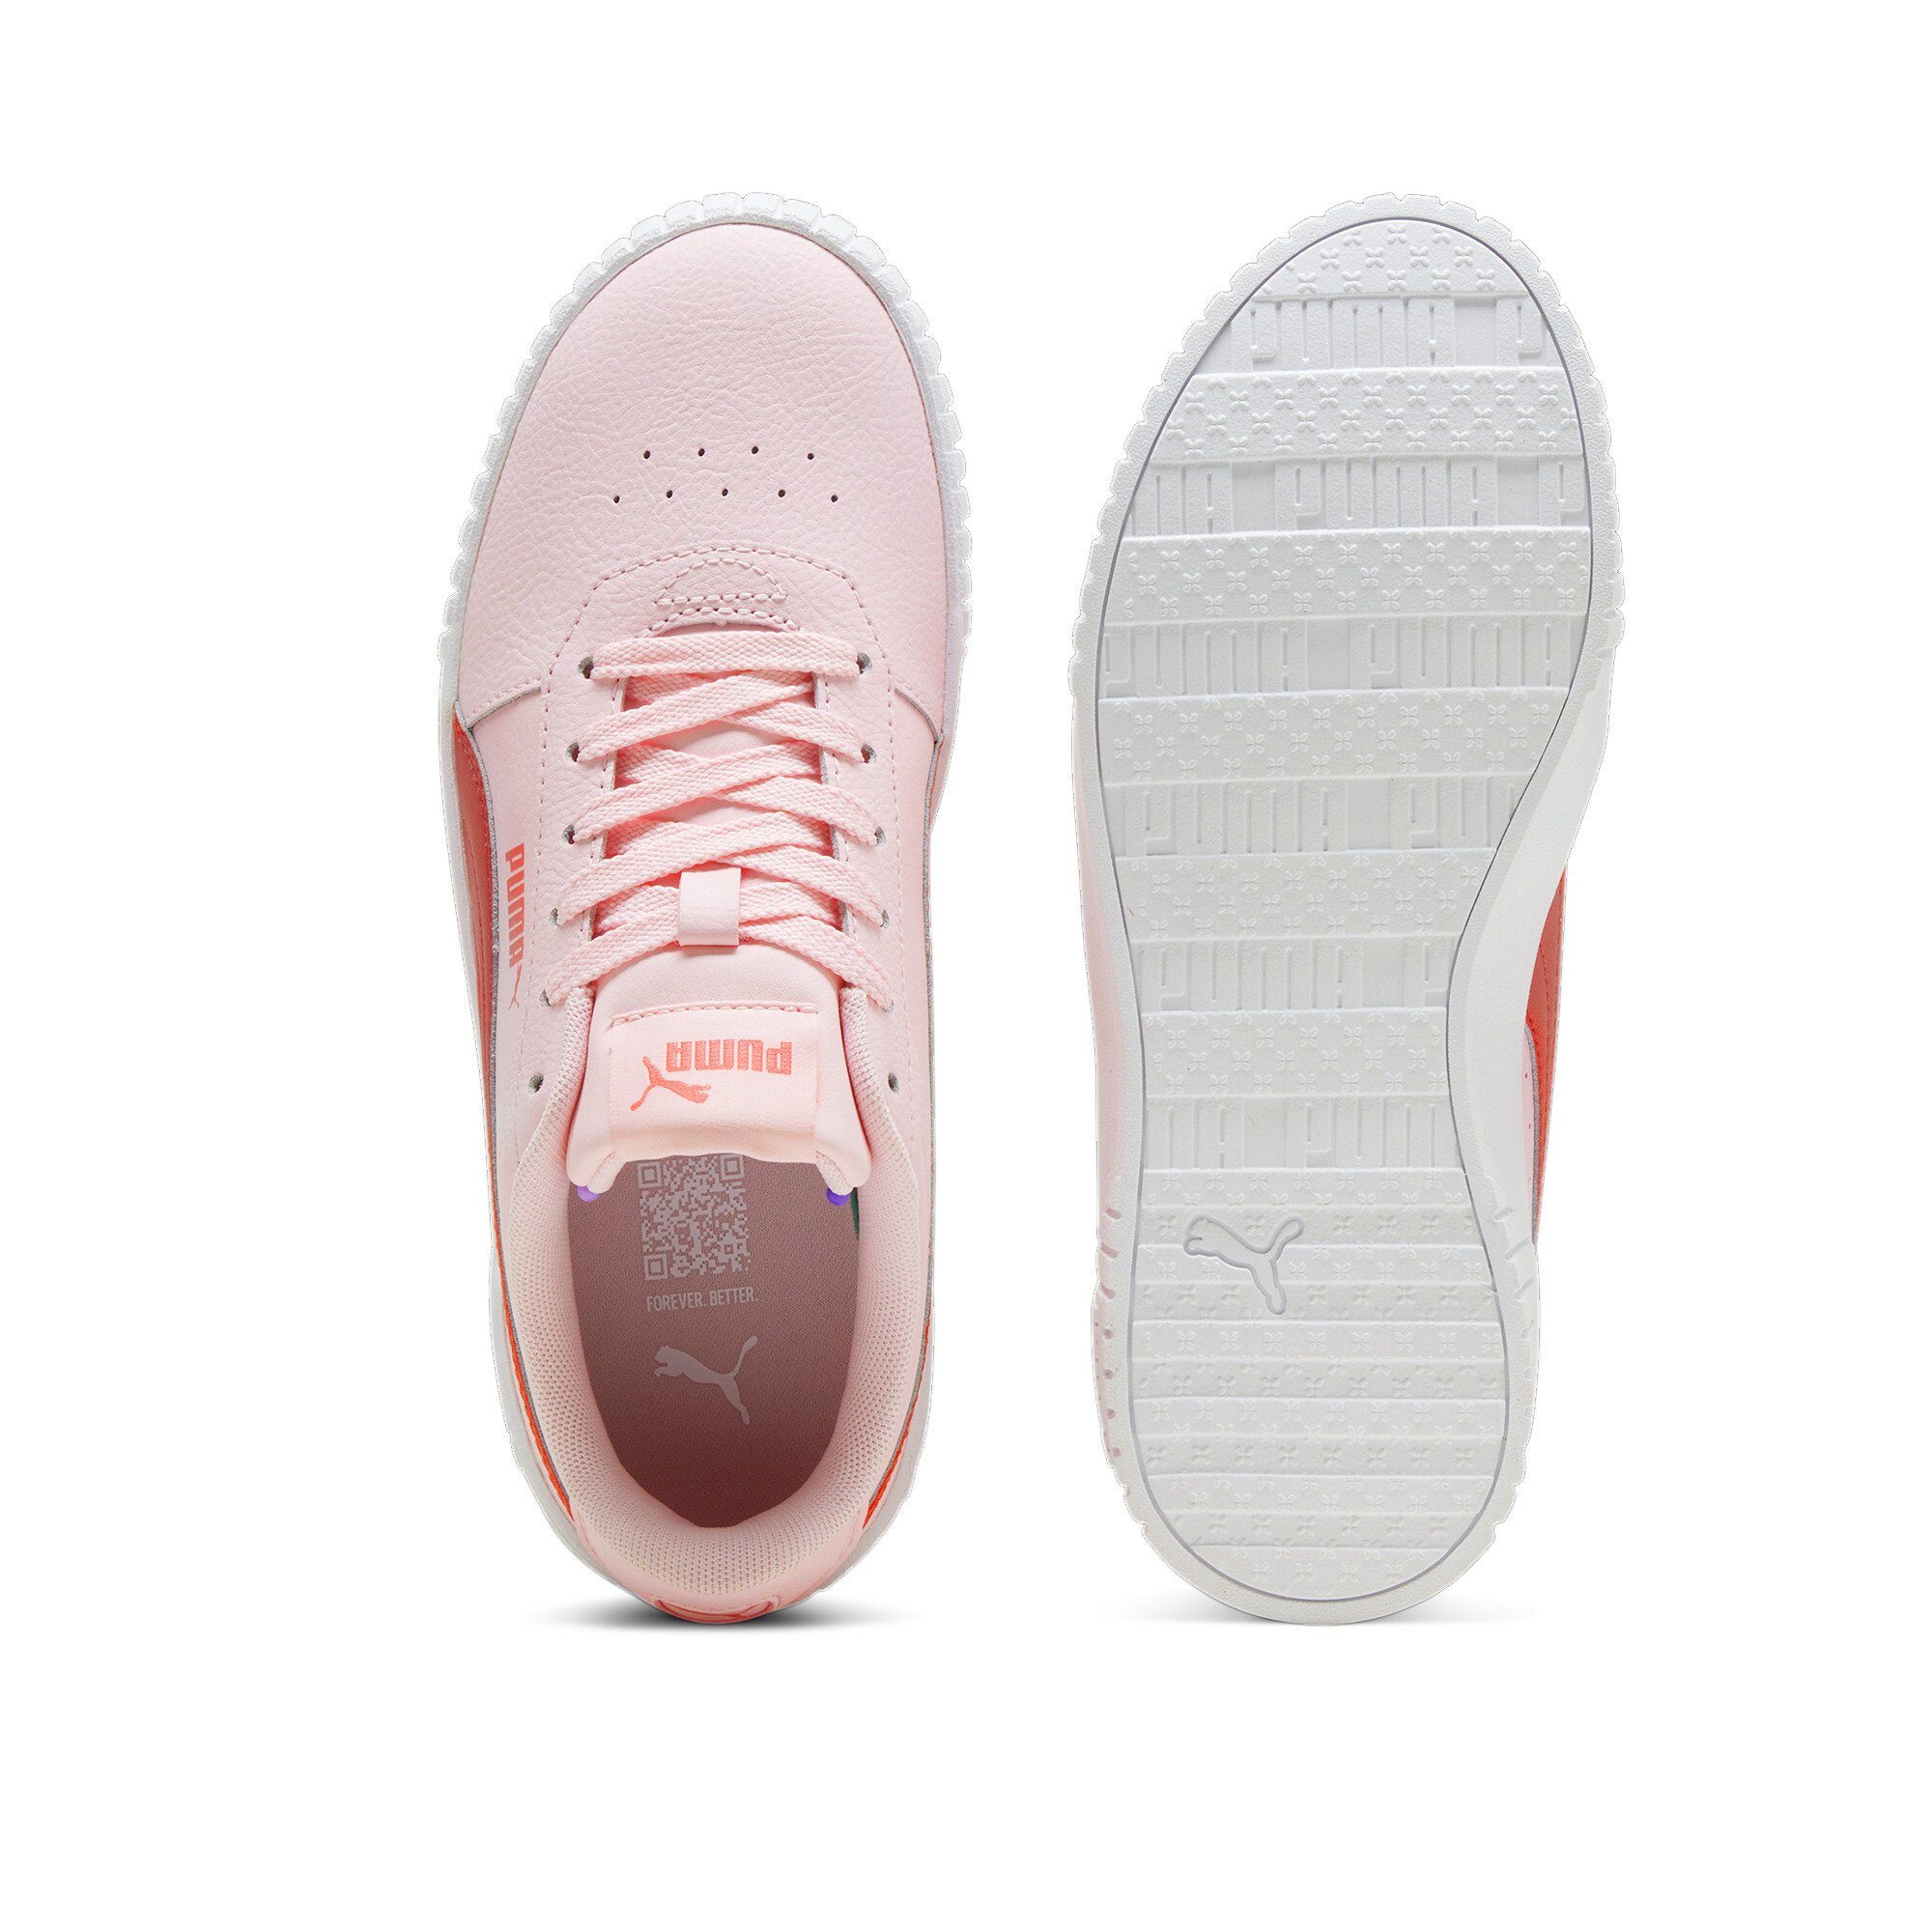 Carina Jugendliche 2.0 Red Sneaker Whisp Active Of White Pink Sneakers PUMA